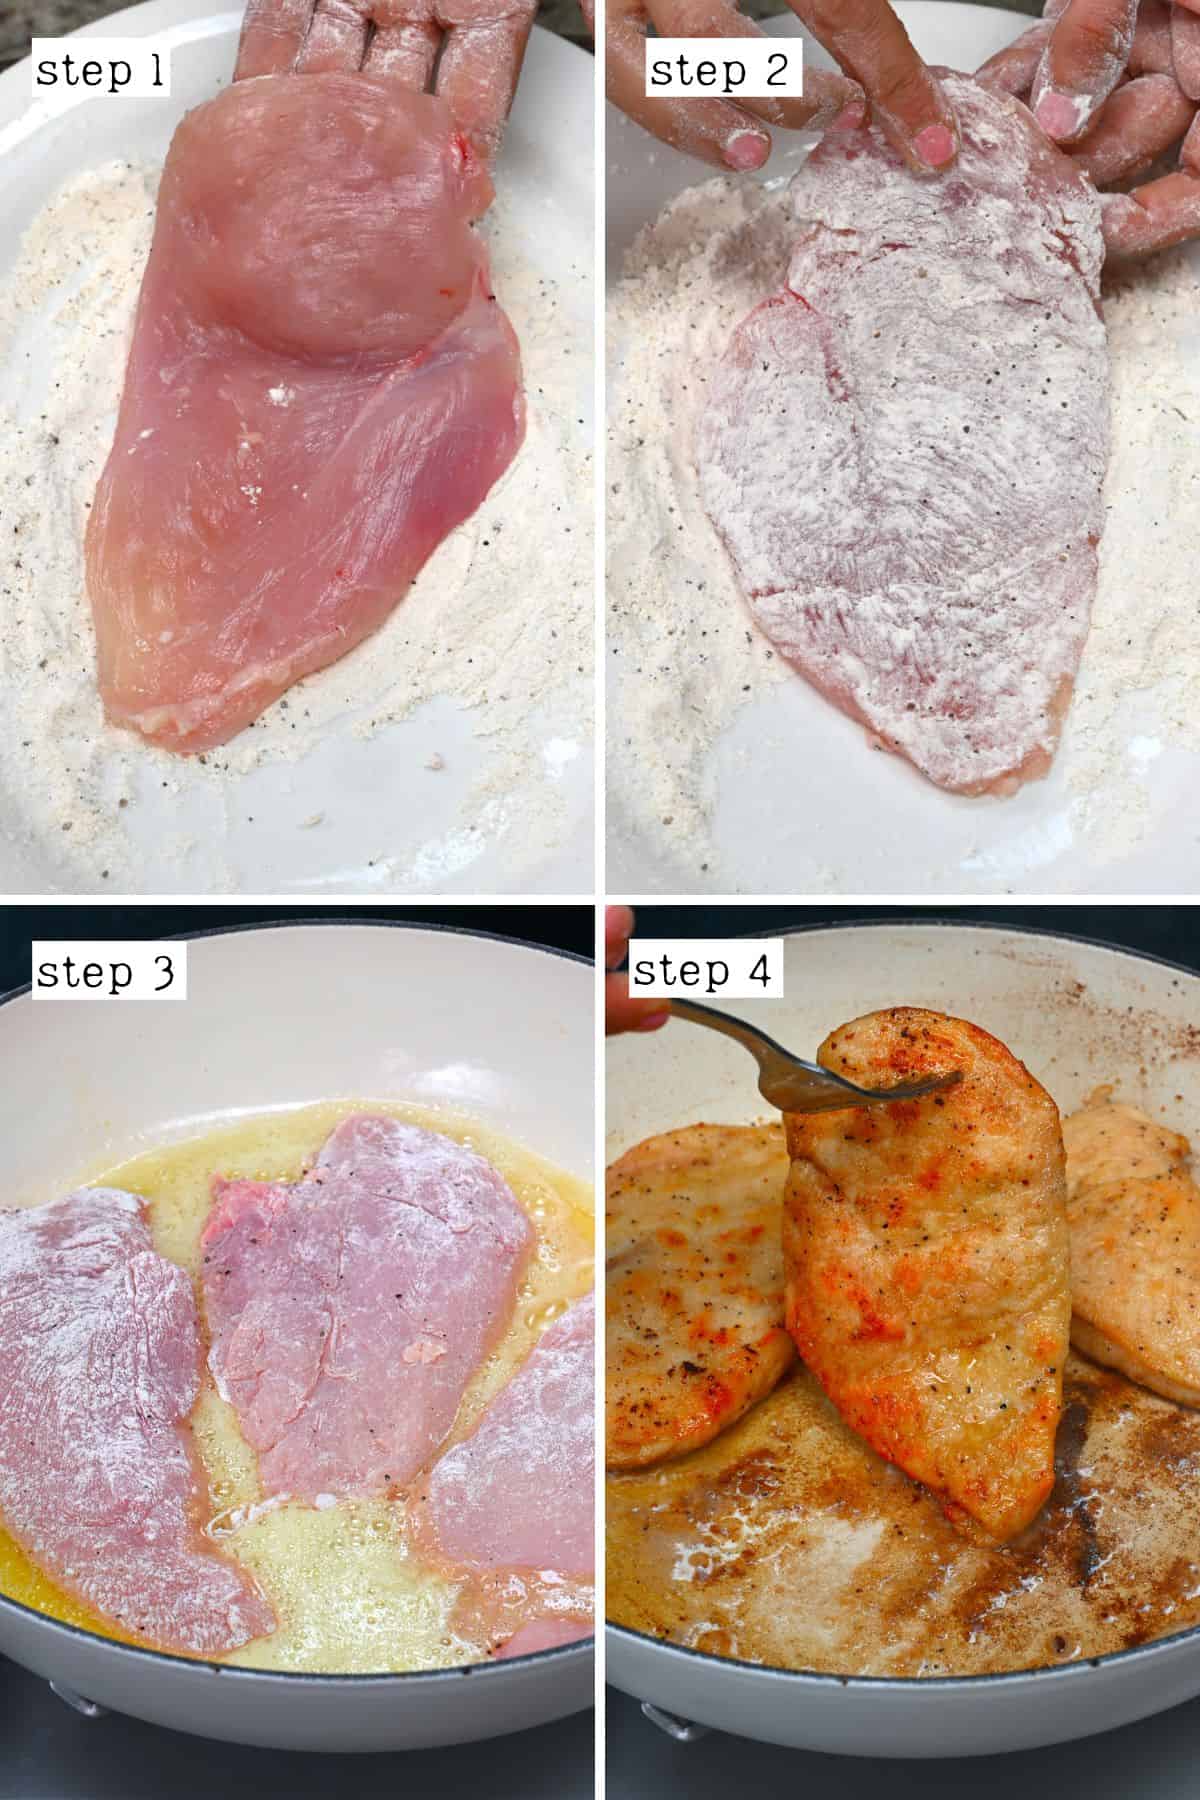 Steps for breading and cooking chicken breasts